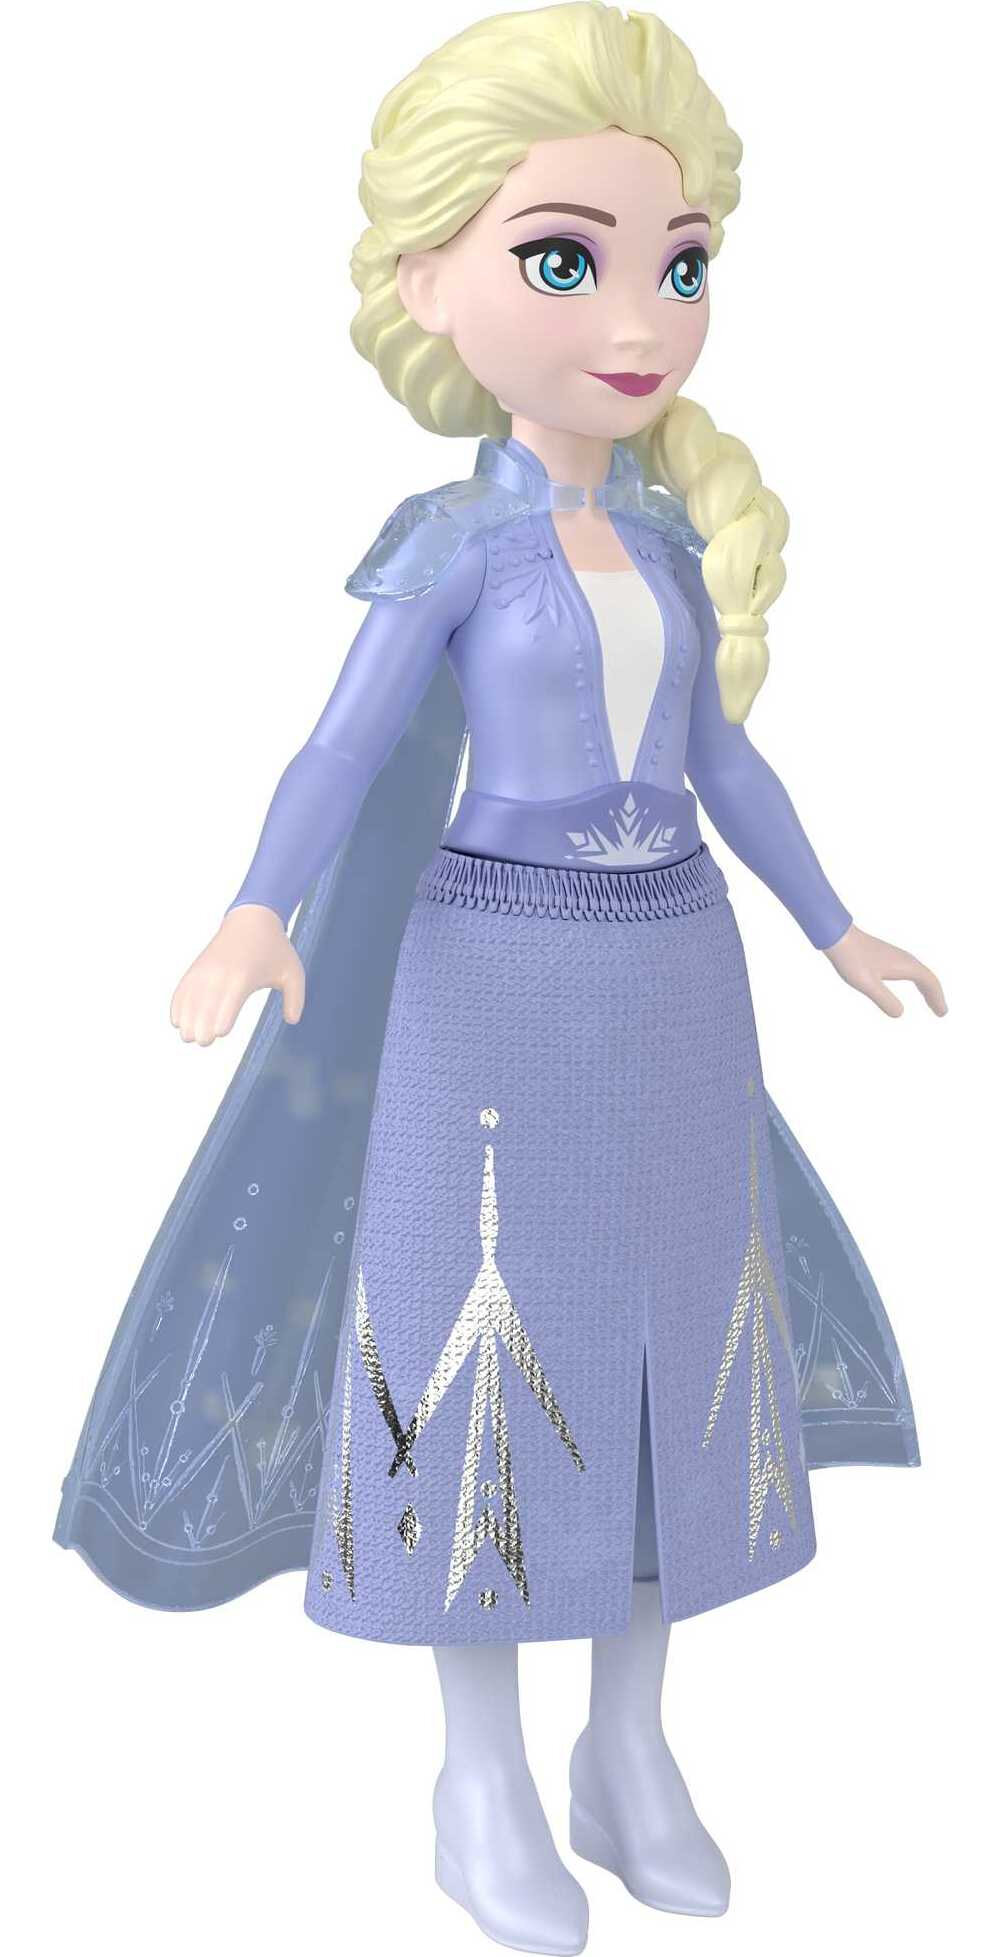 Disney Frozen Elsa Small Doll in Travel Look, Posable with Removable Cape & Skirt - image 3 of 6